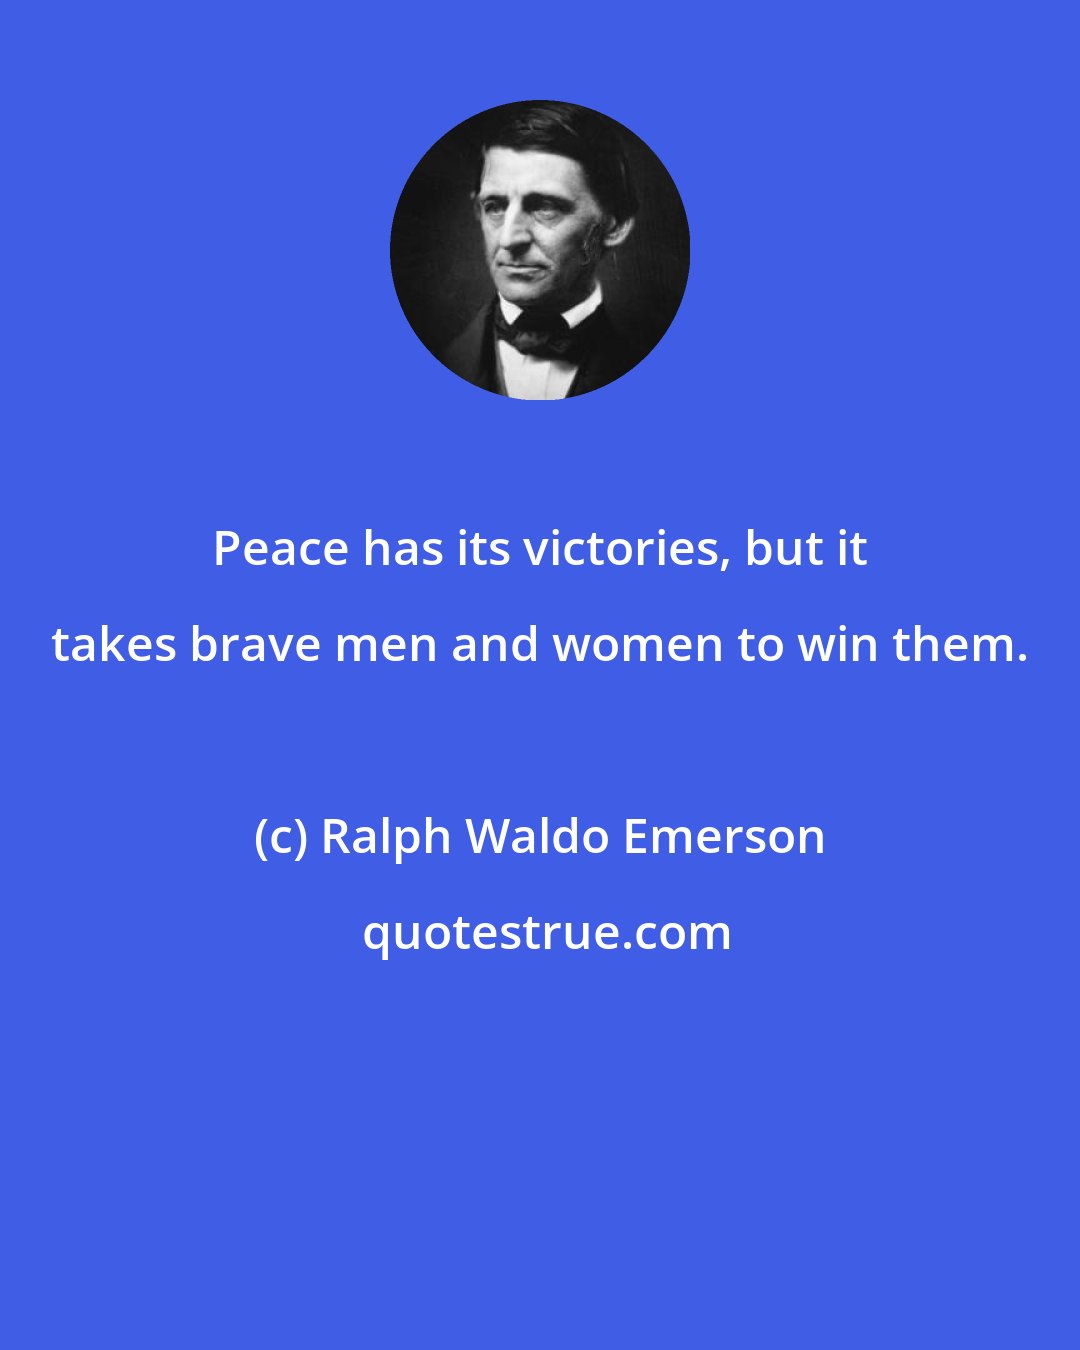 Ralph Waldo Emerson: Peace has its victories, but it takes brave men and women to win them.